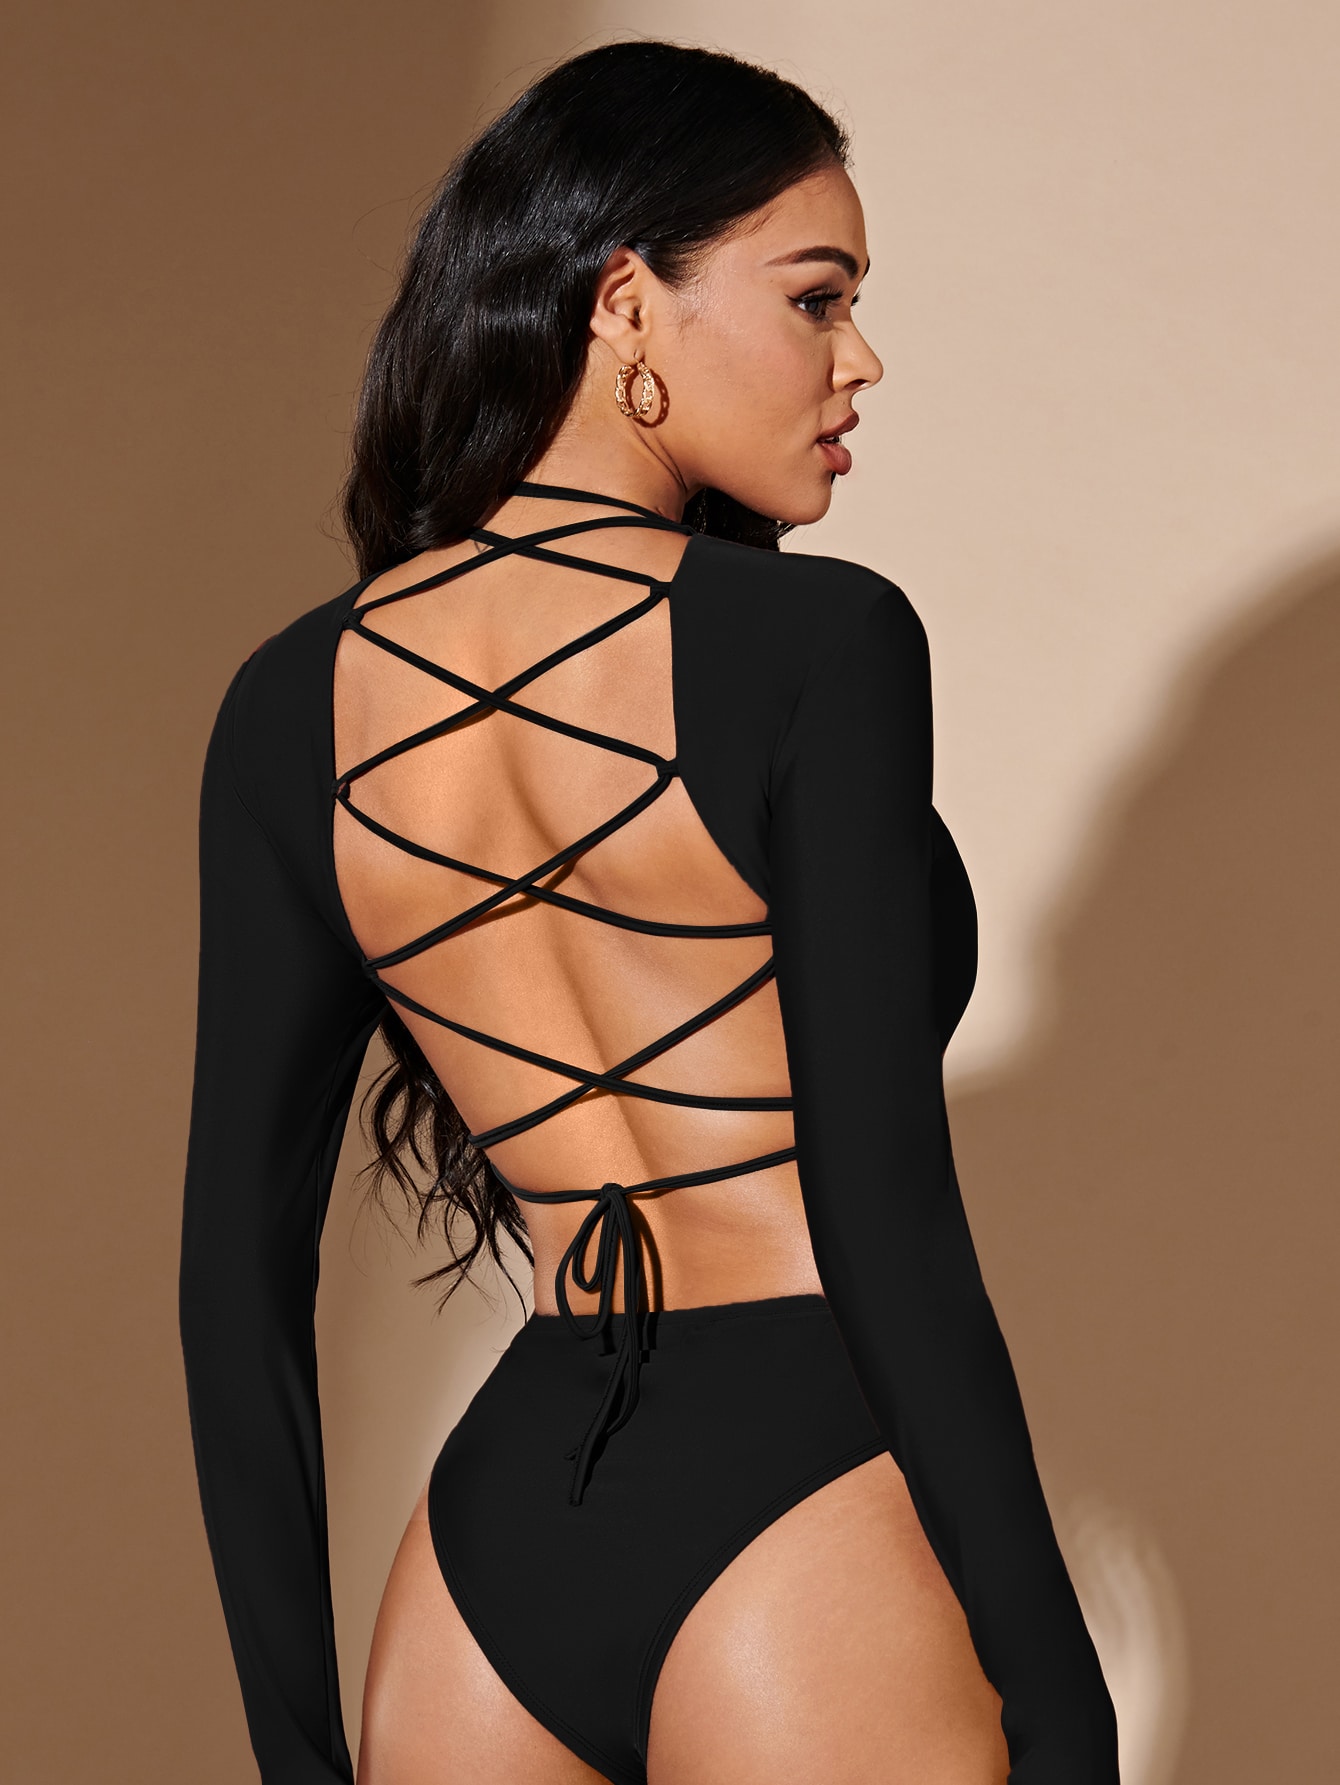 Backless Styles, Dresses, Tops & Bodysuits